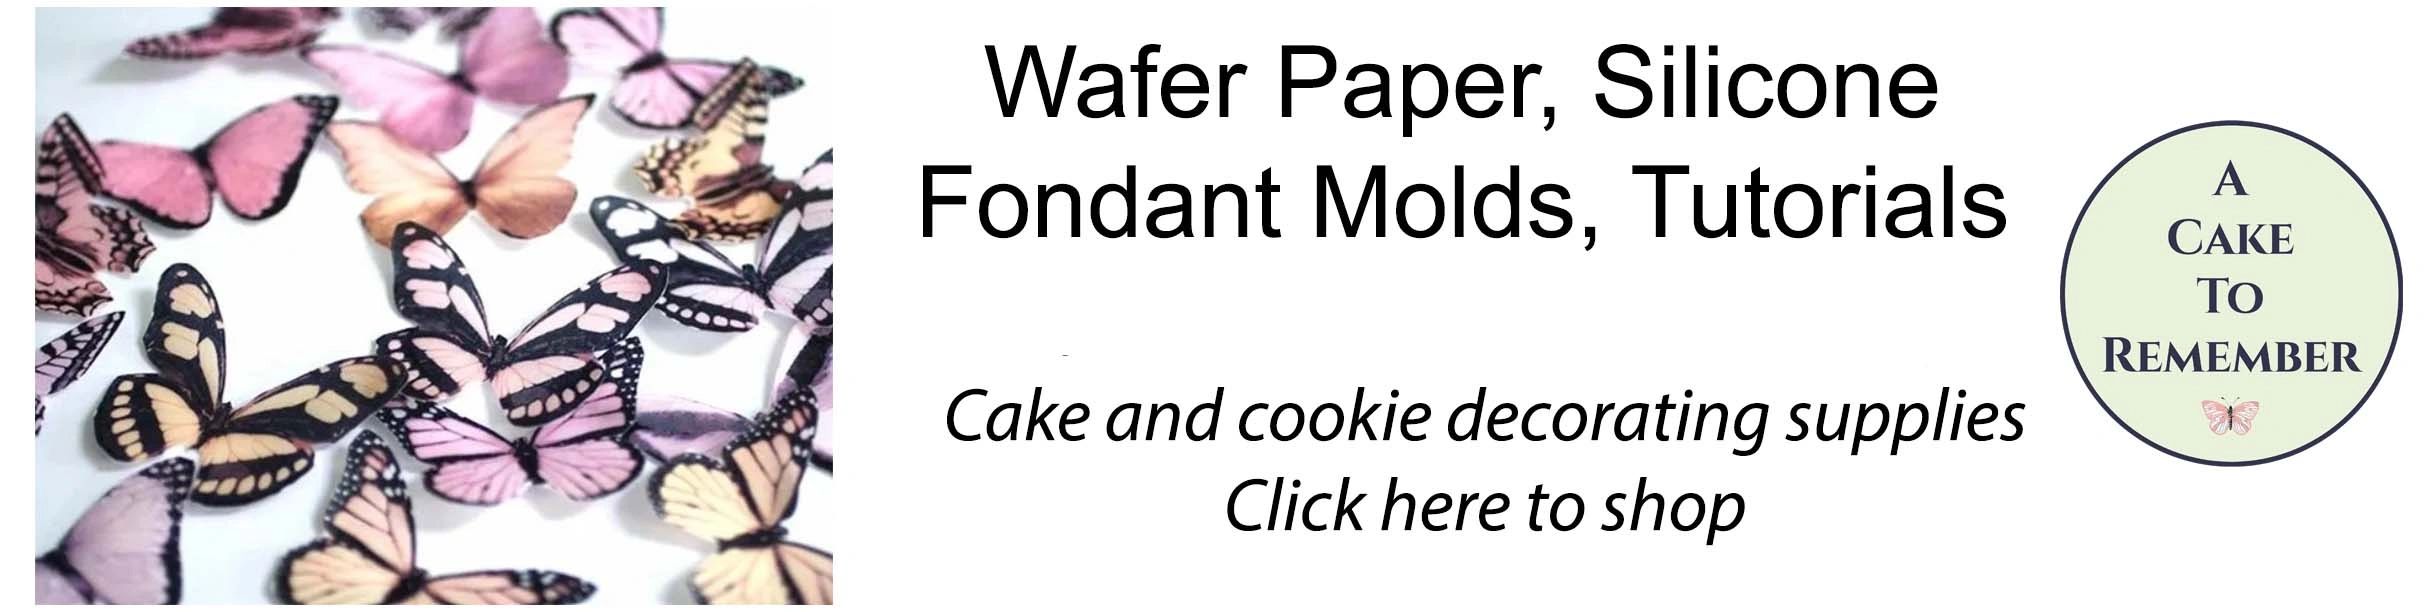 What Is Edible Wafer Paper For Cakes? A Complete Guide